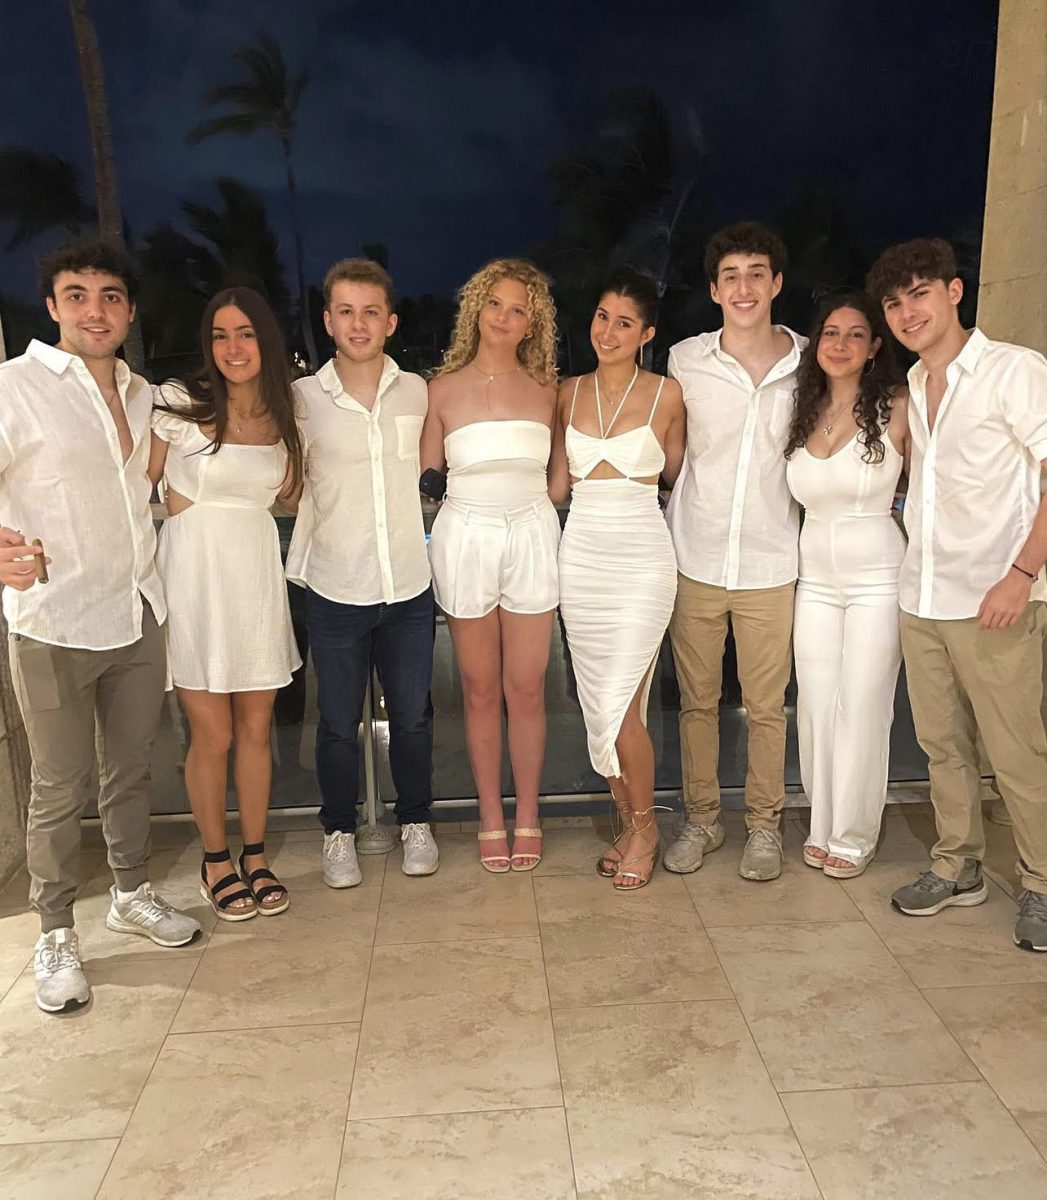 The Class of 2023 wears white to an event on their senior spring break trip to Punta Cana.